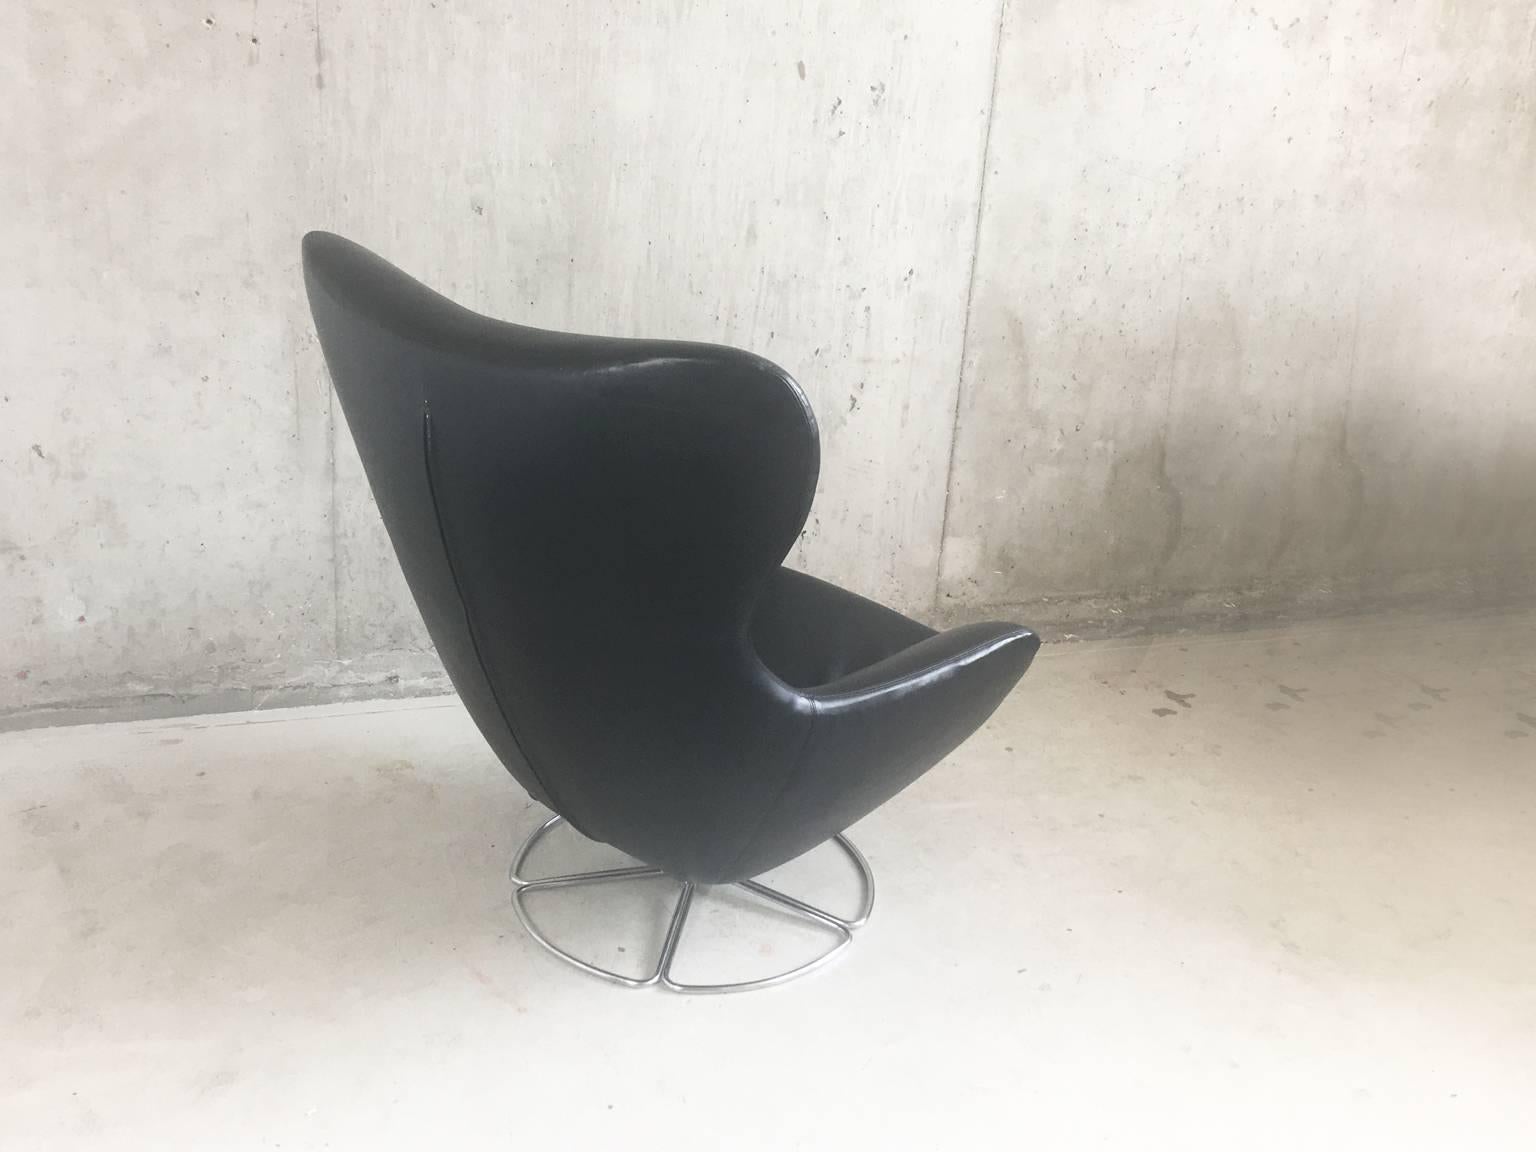 Great Britain (UK) 1970s Mid-Century Large Black Vinyl Lounge Chair For Sale